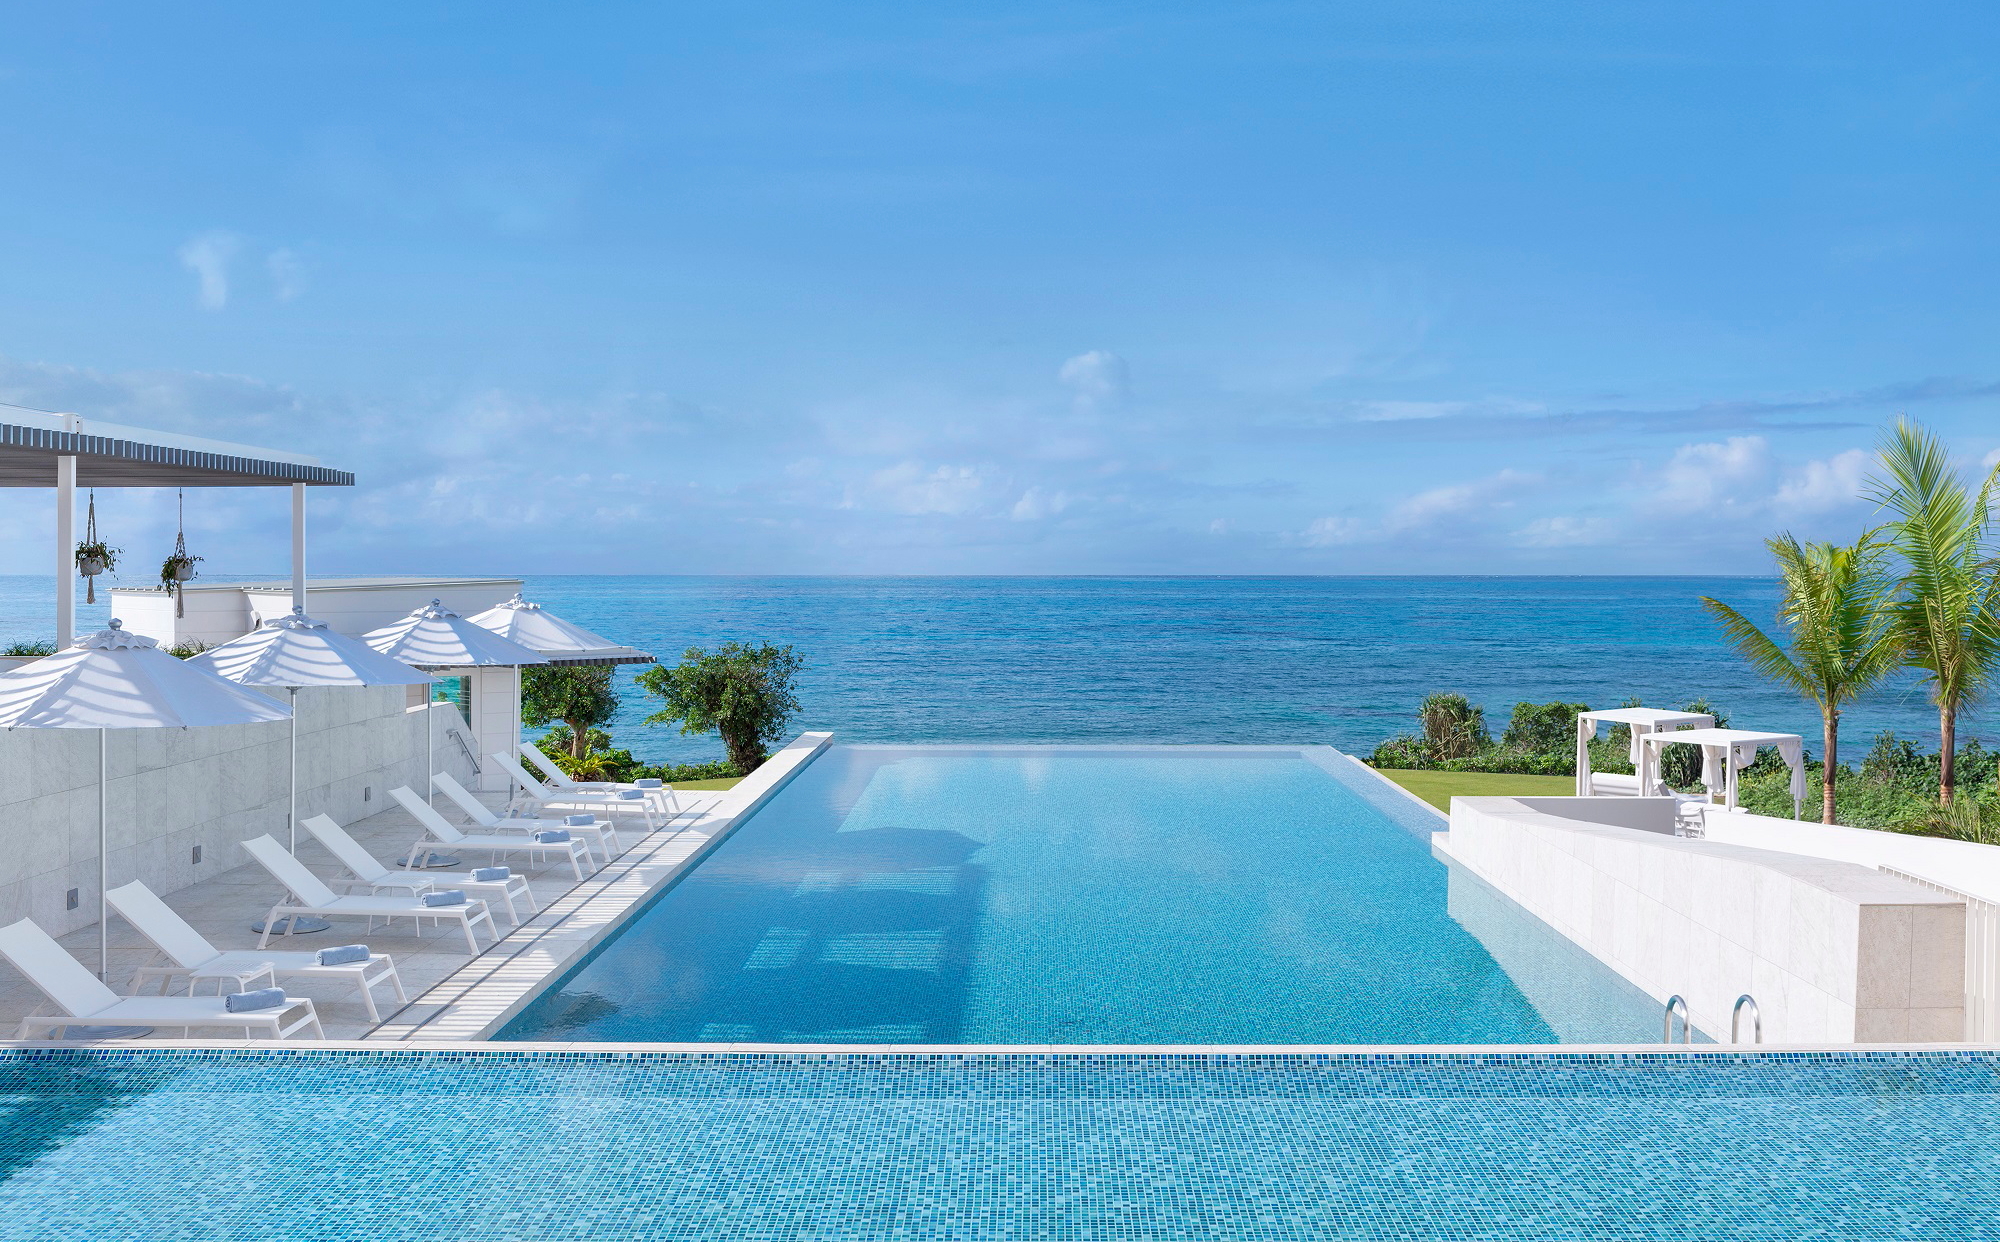 Swimming pool at the 58-room Iraph Sui, a Luxury Collection Hotel in Miyako, Okinawa, Japan Click to enlarge.